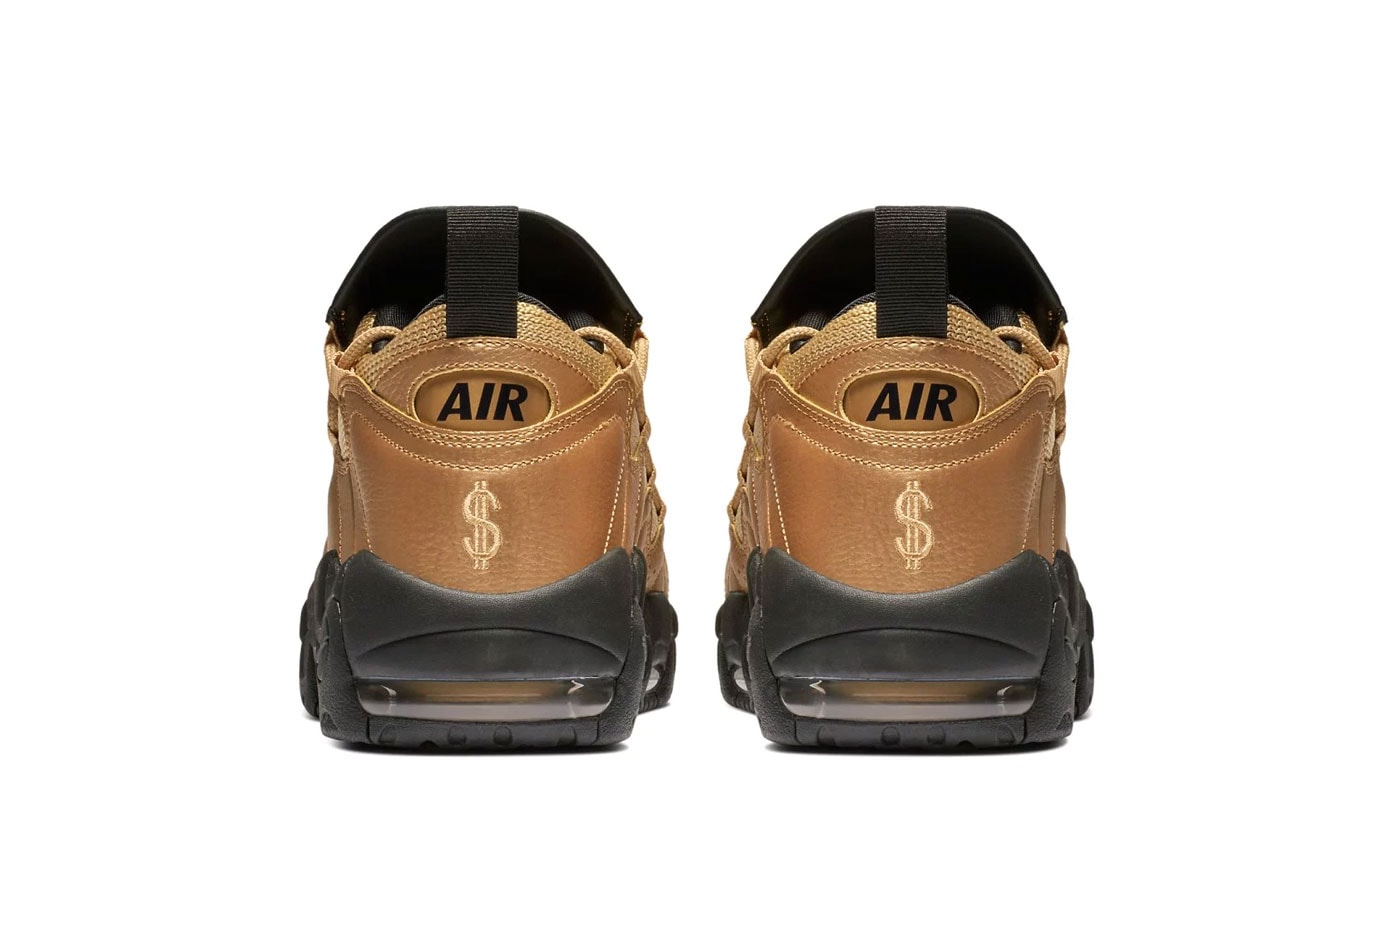 Nike Air More Money "Metallic Gold" Release Date october 2018 price colorway sneaker online buy purchase size